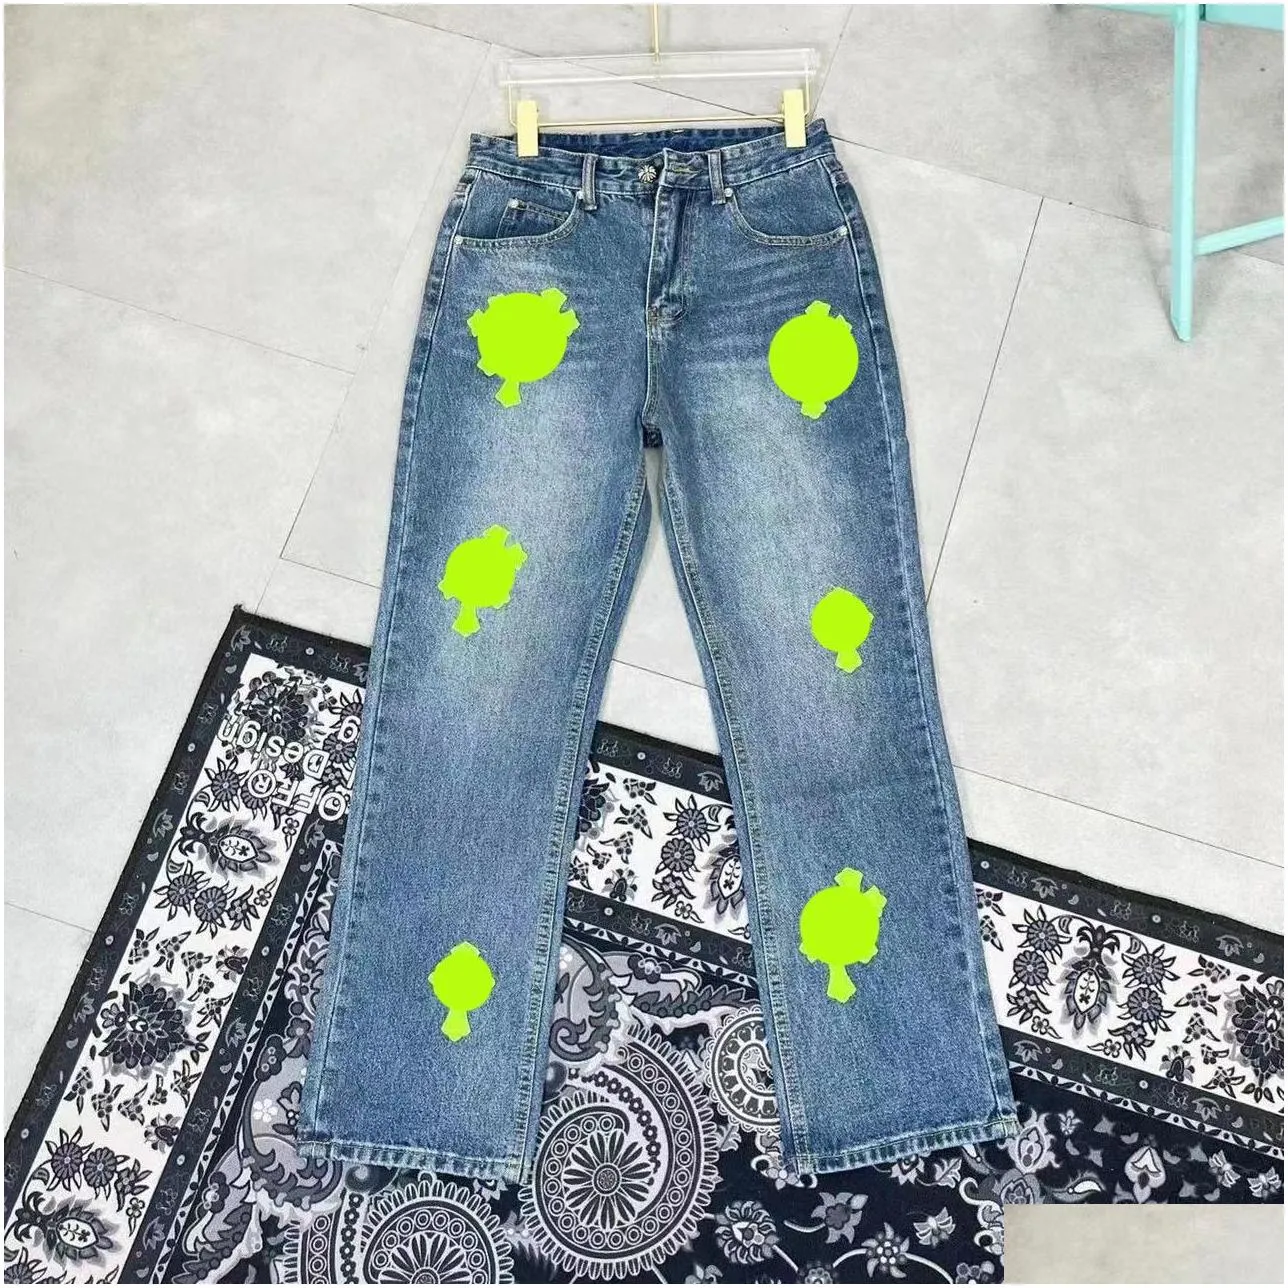 2023 Mens Jeans Designer Make Old Washed Jeans Chrome Straight Trousers Heart Prints for Women Men Casual Long Style Blue Black chromees hearts Purple Jeans